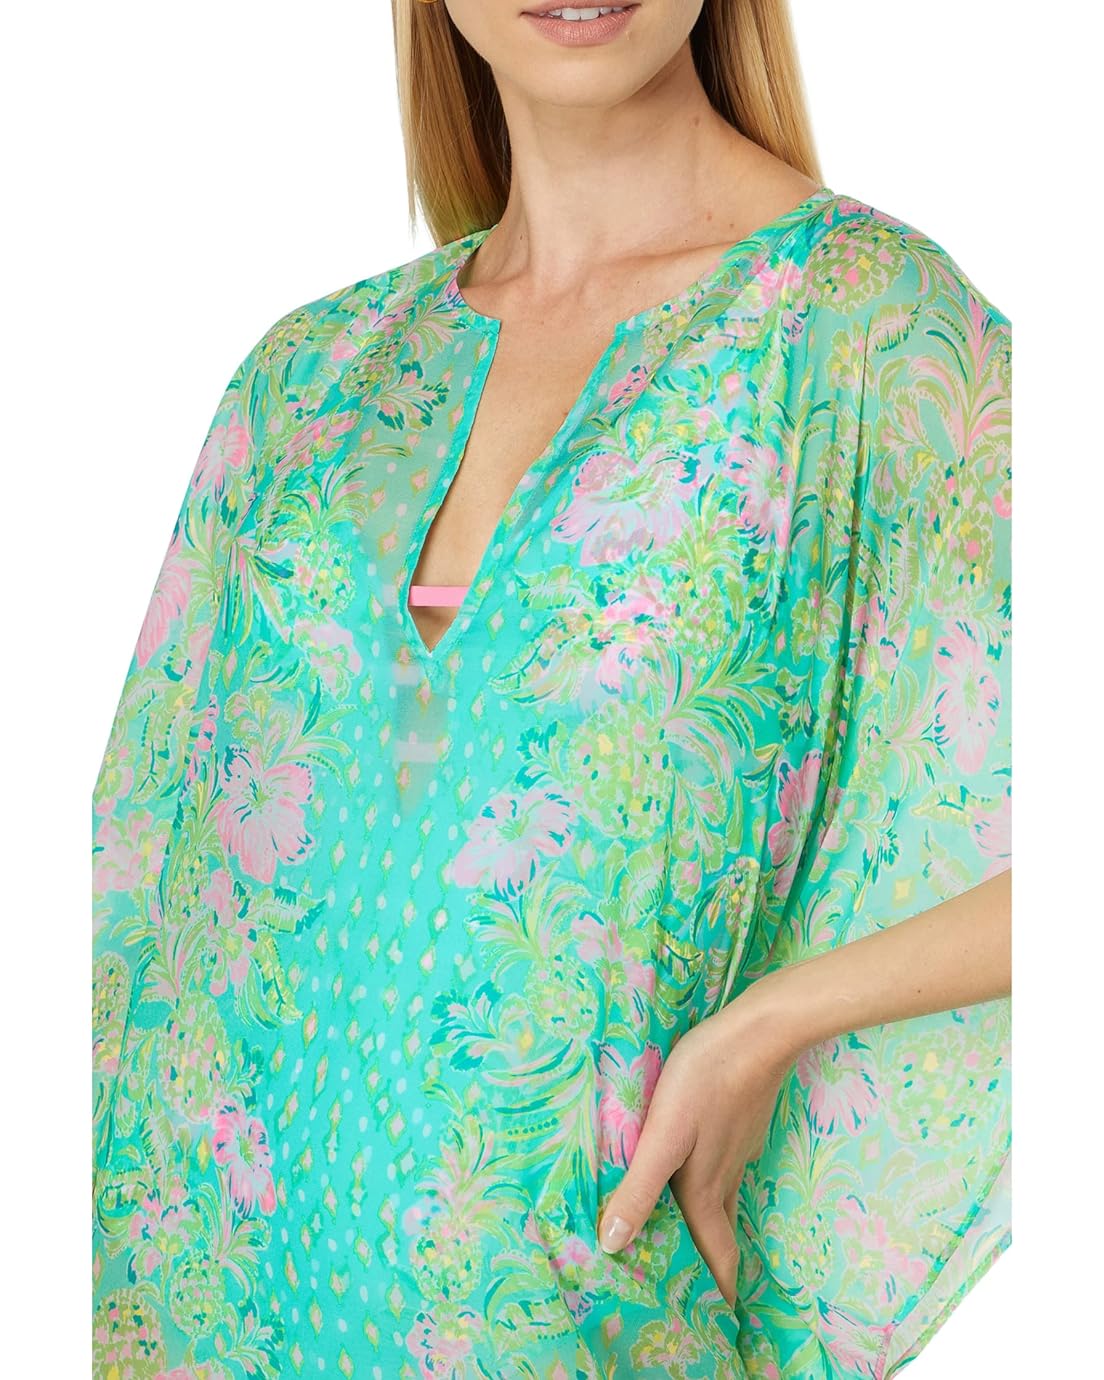  Lilly Pulitzer Cuca Cover-Up